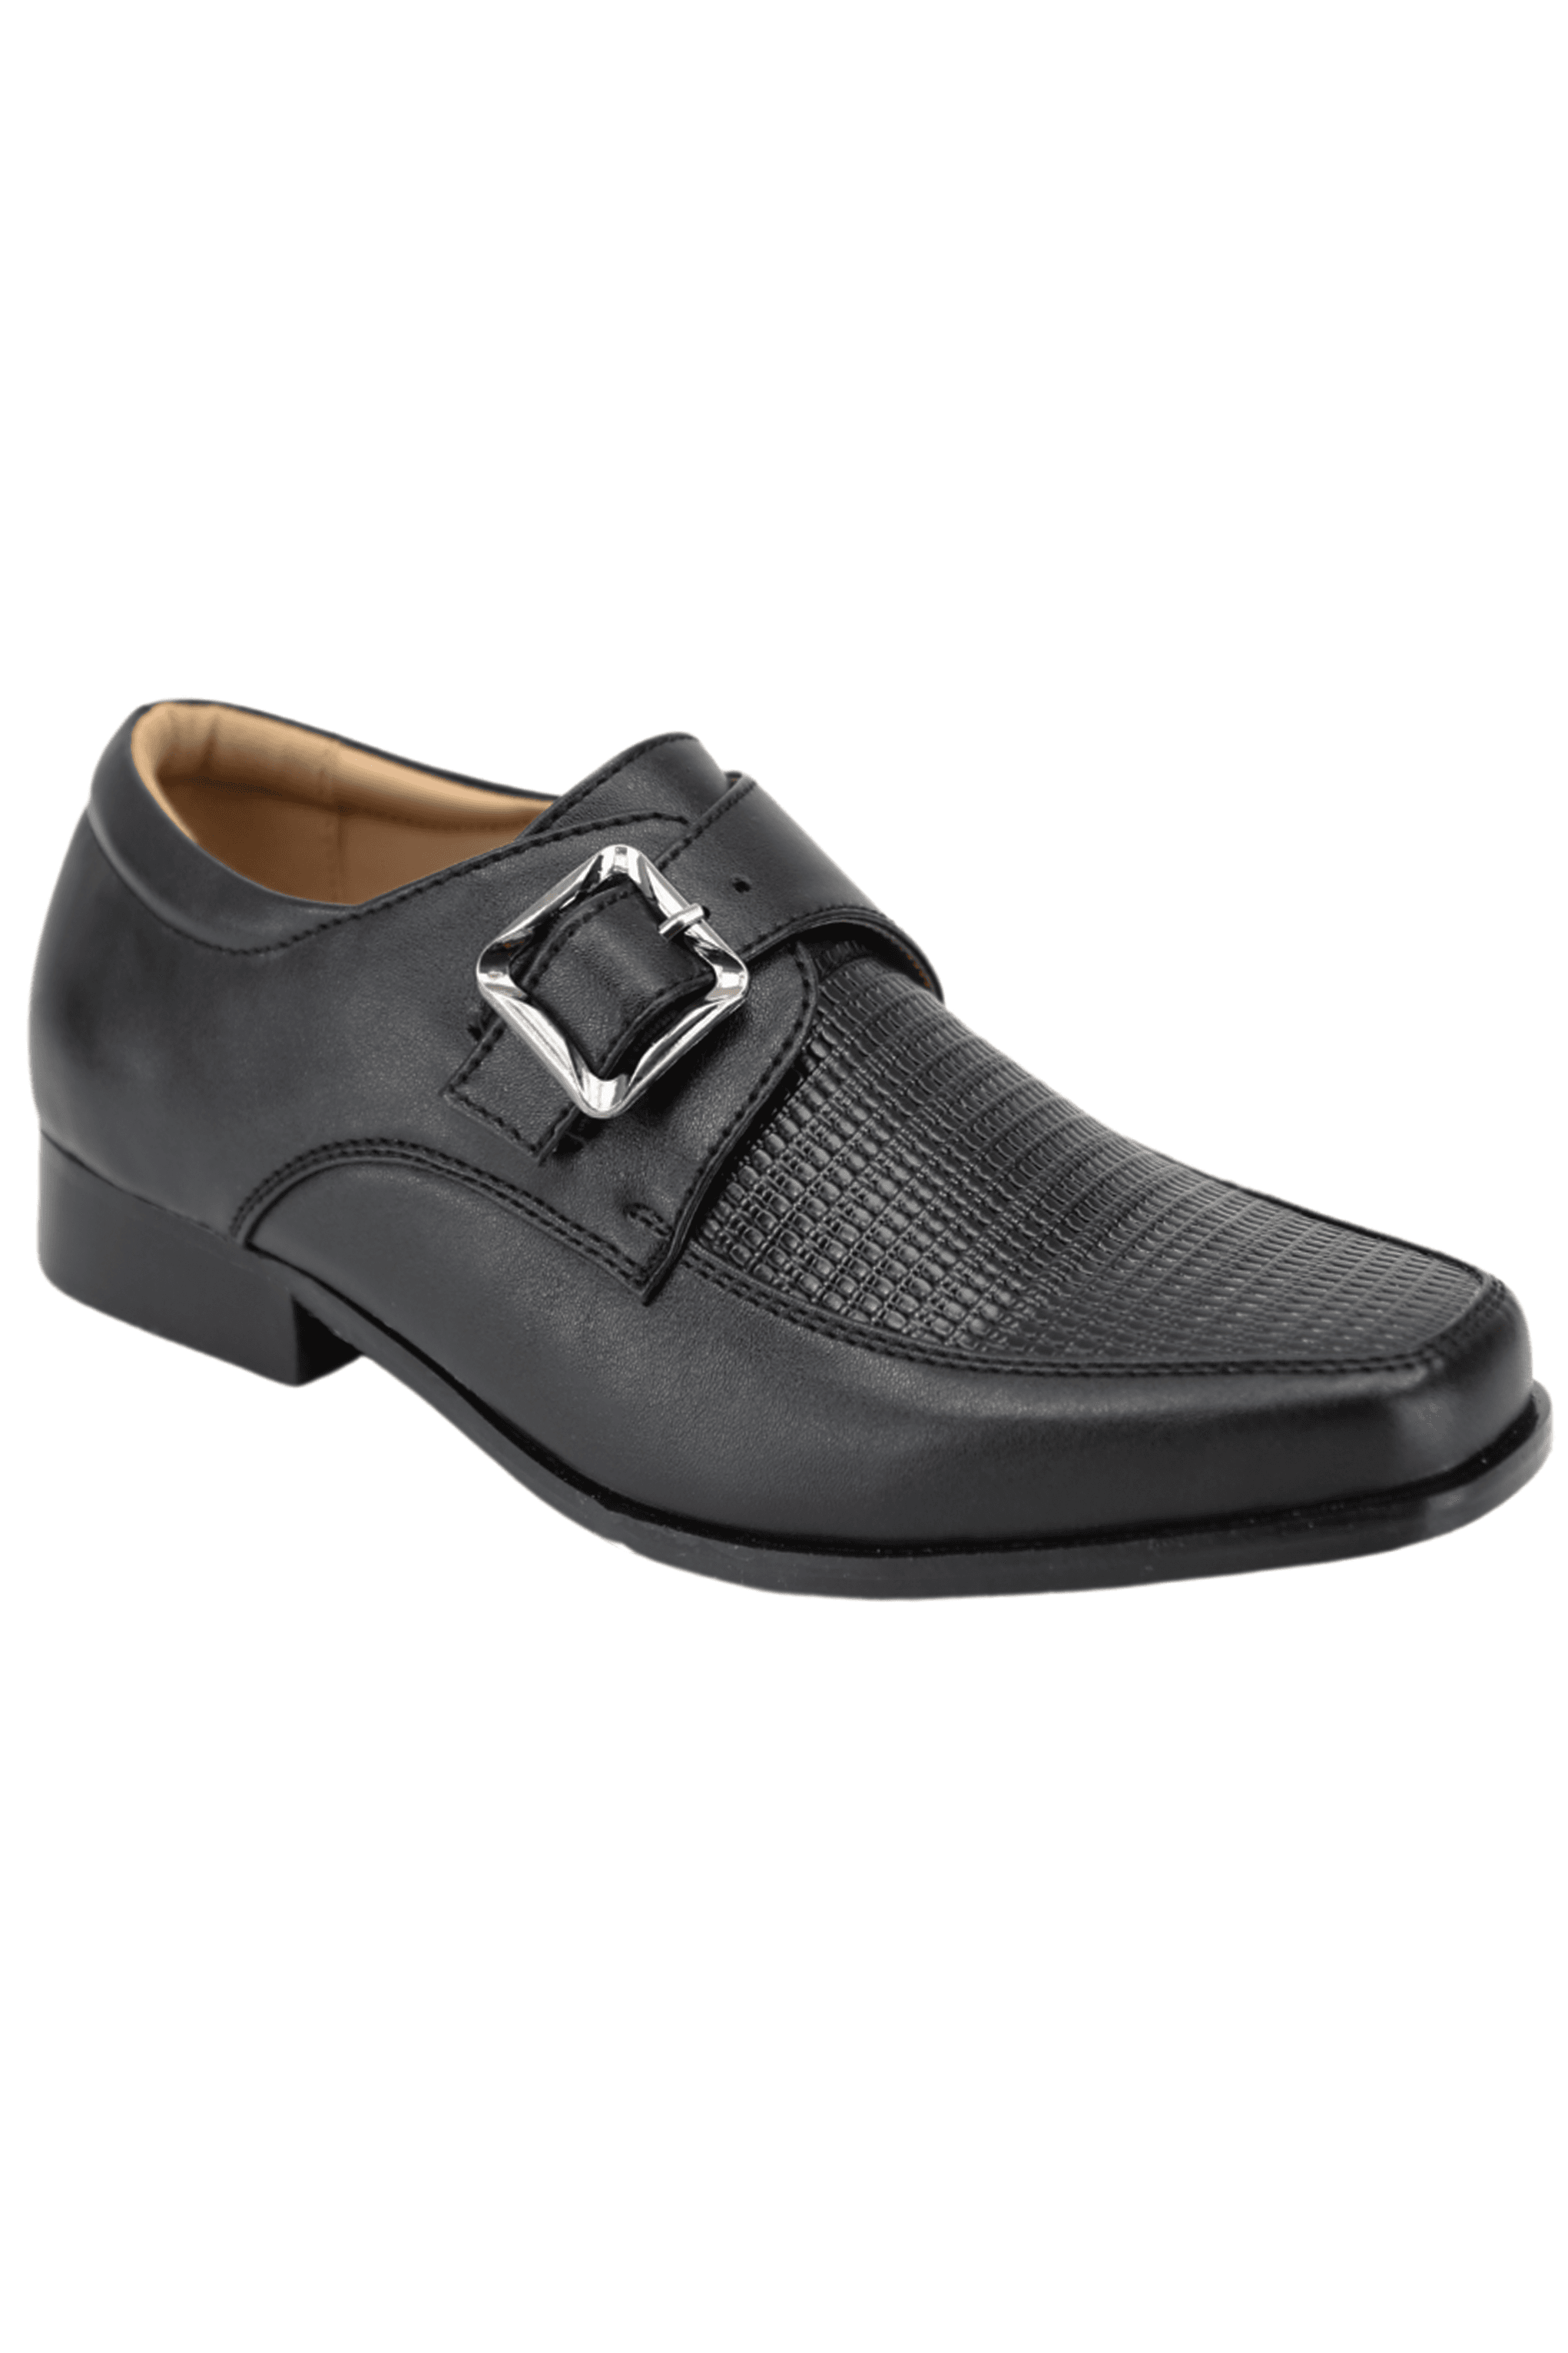 Boys Textured Leather Buckled Monk Shoes - Black